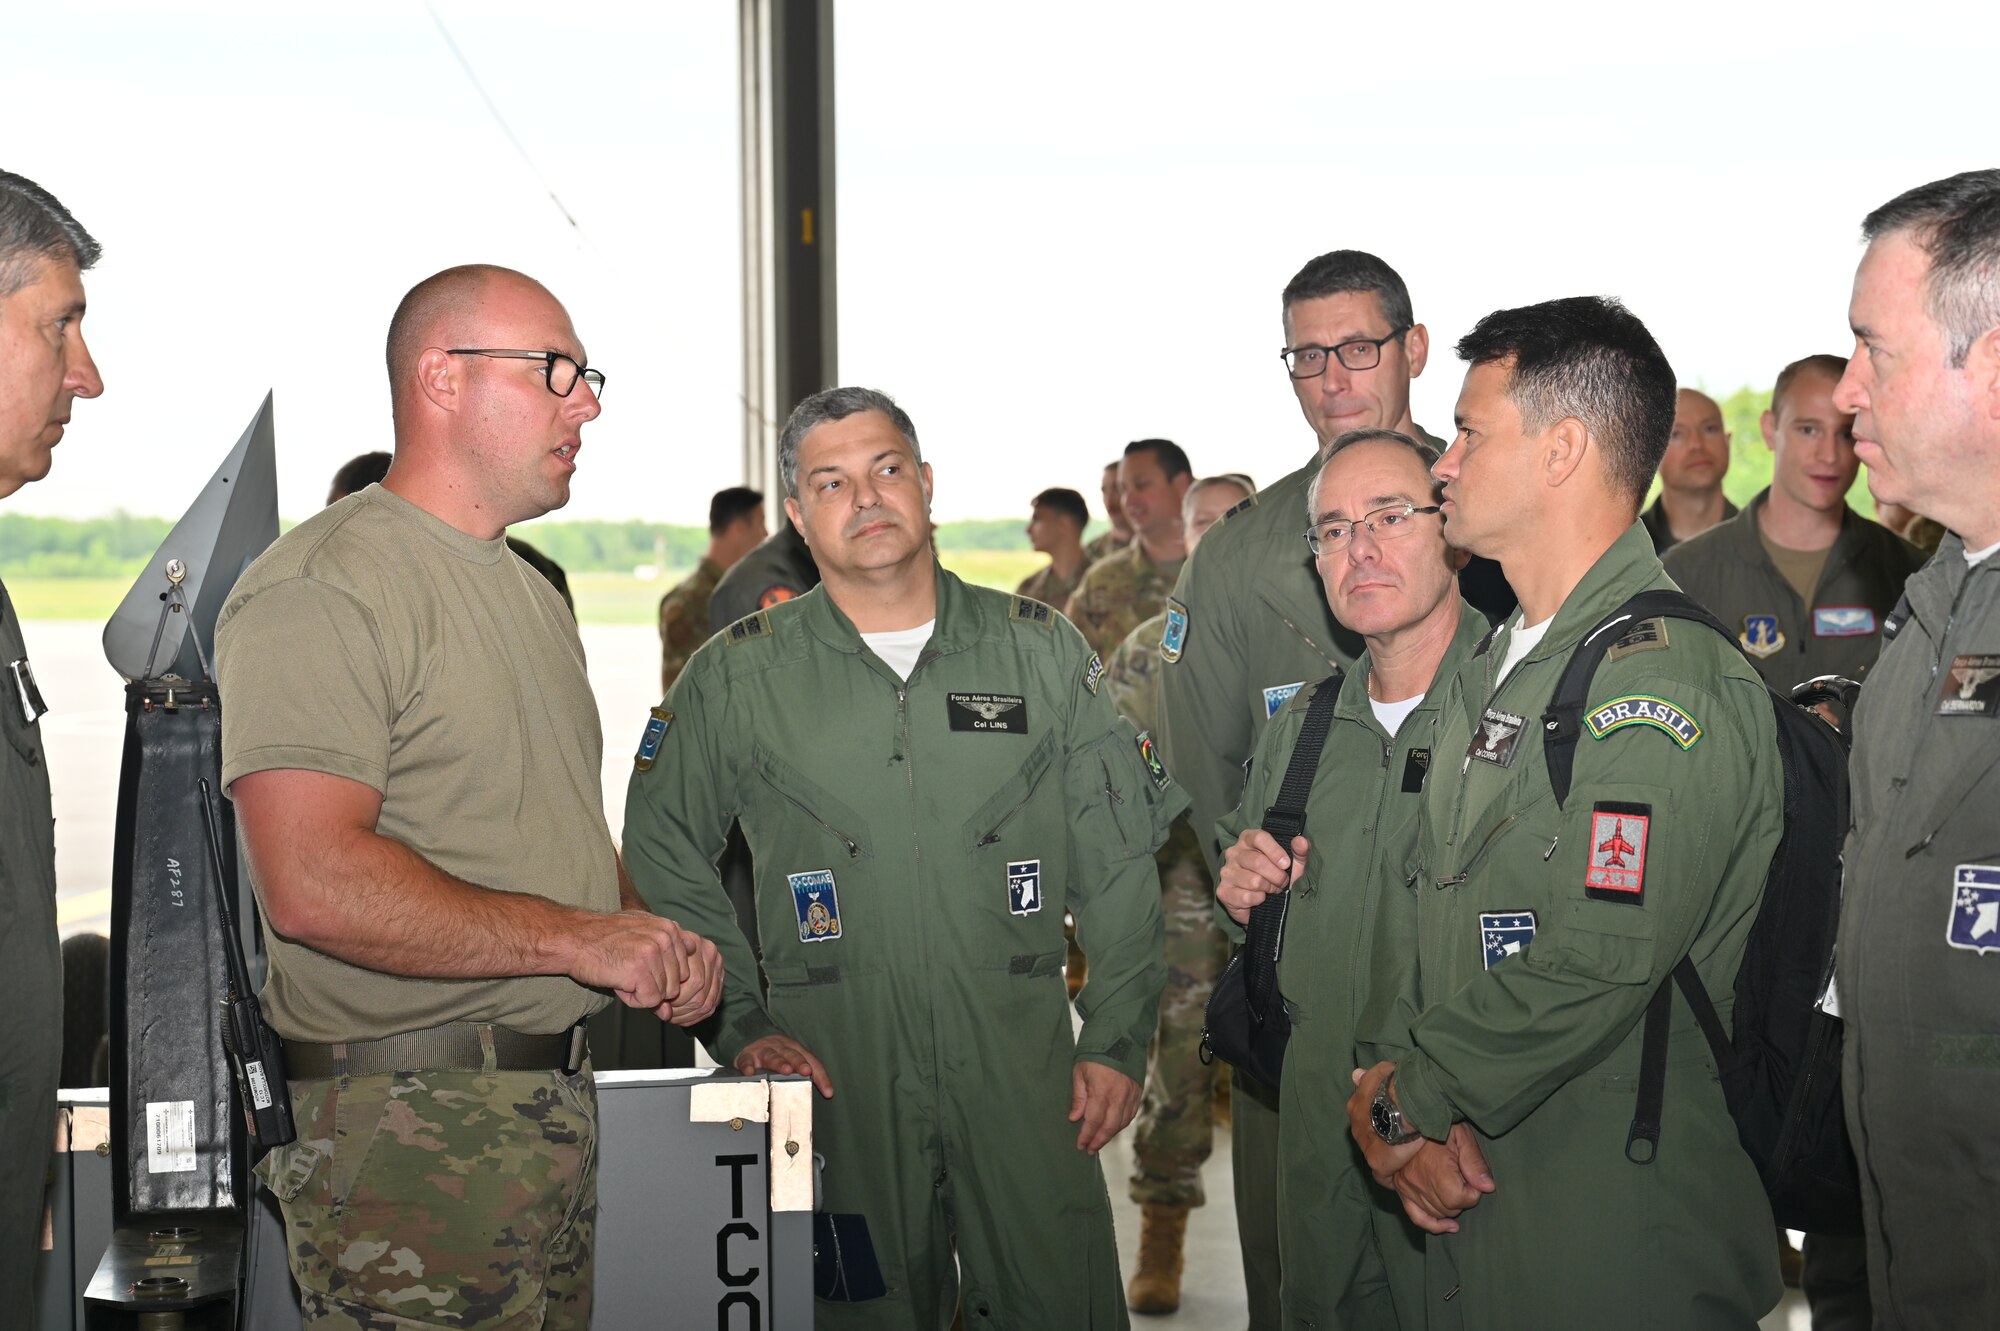 HANCOCK FIELD AIR NATIONAL GUARD BASE, SYRACUSE, NY. --  Master Sgt. Eric Wintersteen, a crew chief with the 174th Maintenance Group, is explaining how he is performing an airframe and engine inspection on the MQ-9 reaper to members from the Brazilian military on June 6, 2022 at Hancock Field Air National Guard base. The Brazilian military’s purpose for the visit is to strengthen the partnership between the New York Air National Guard and the Brazilian Air Force Aerospace Operations Command. (U.S. Air National Guard photo by Master Sgt. Barbara Olney)